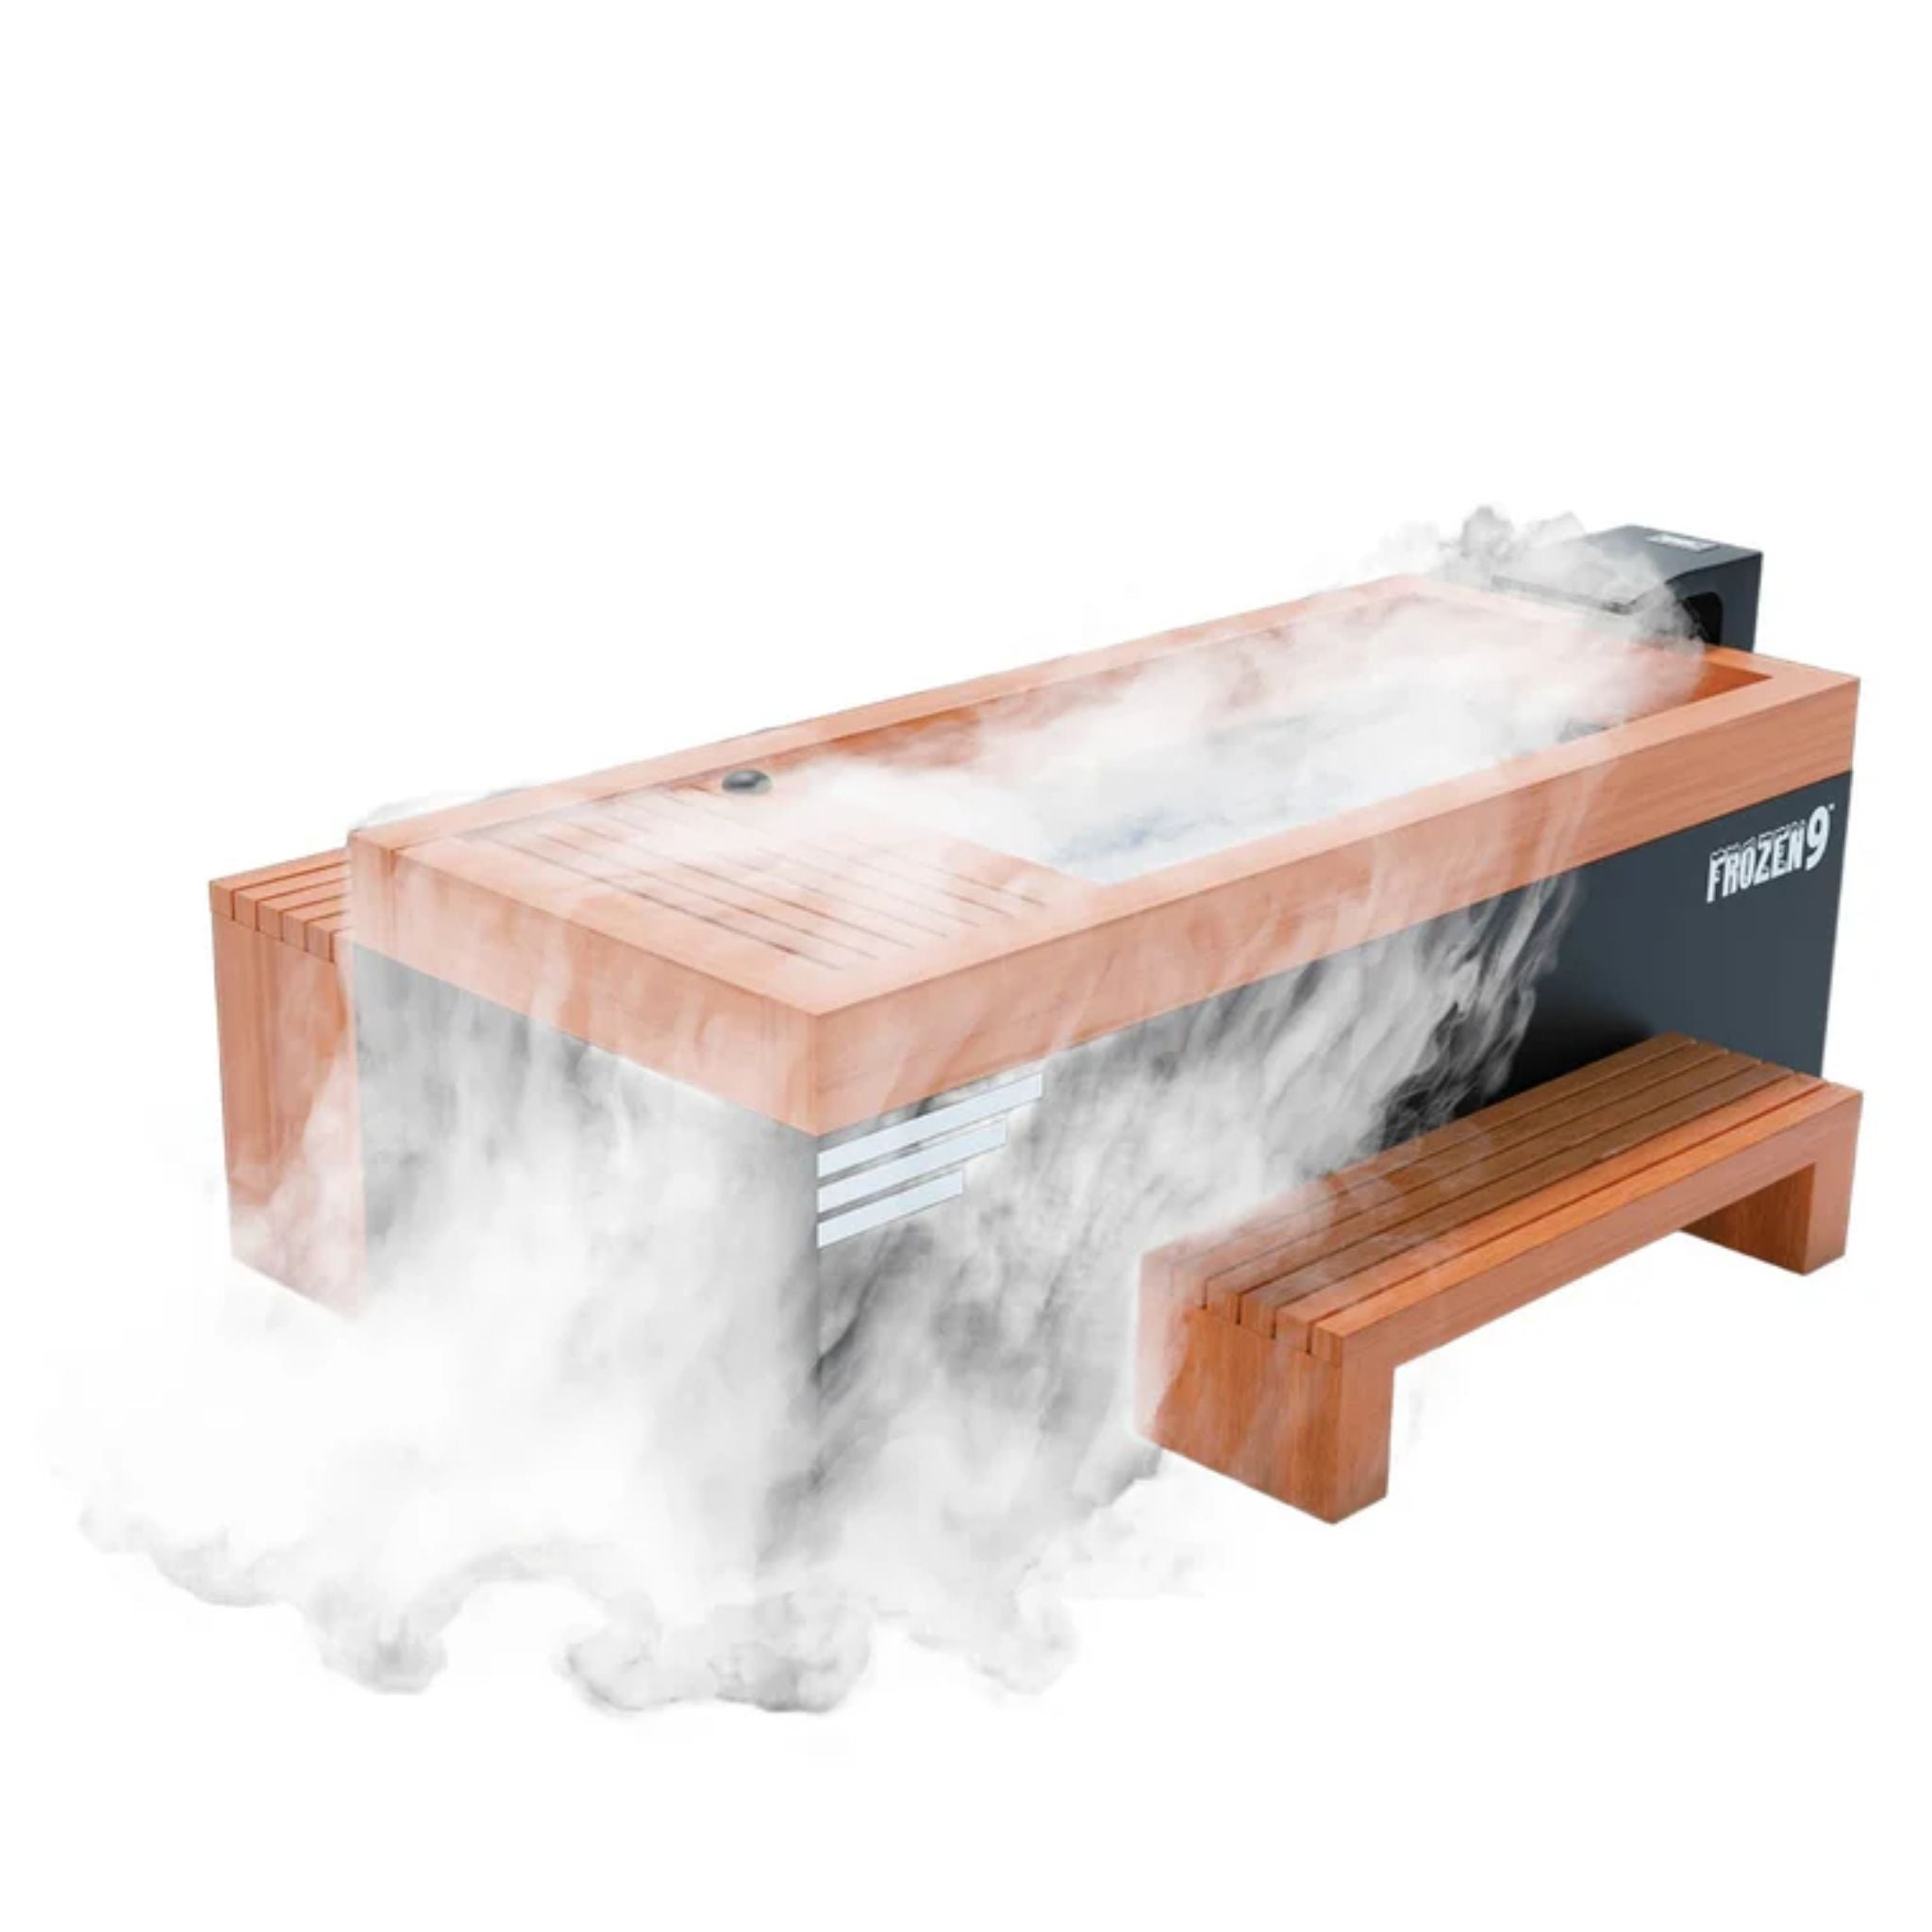 Medical Saunas Frozen Cold Plunge With Accessories Kit And Essential Oil Steam Generator